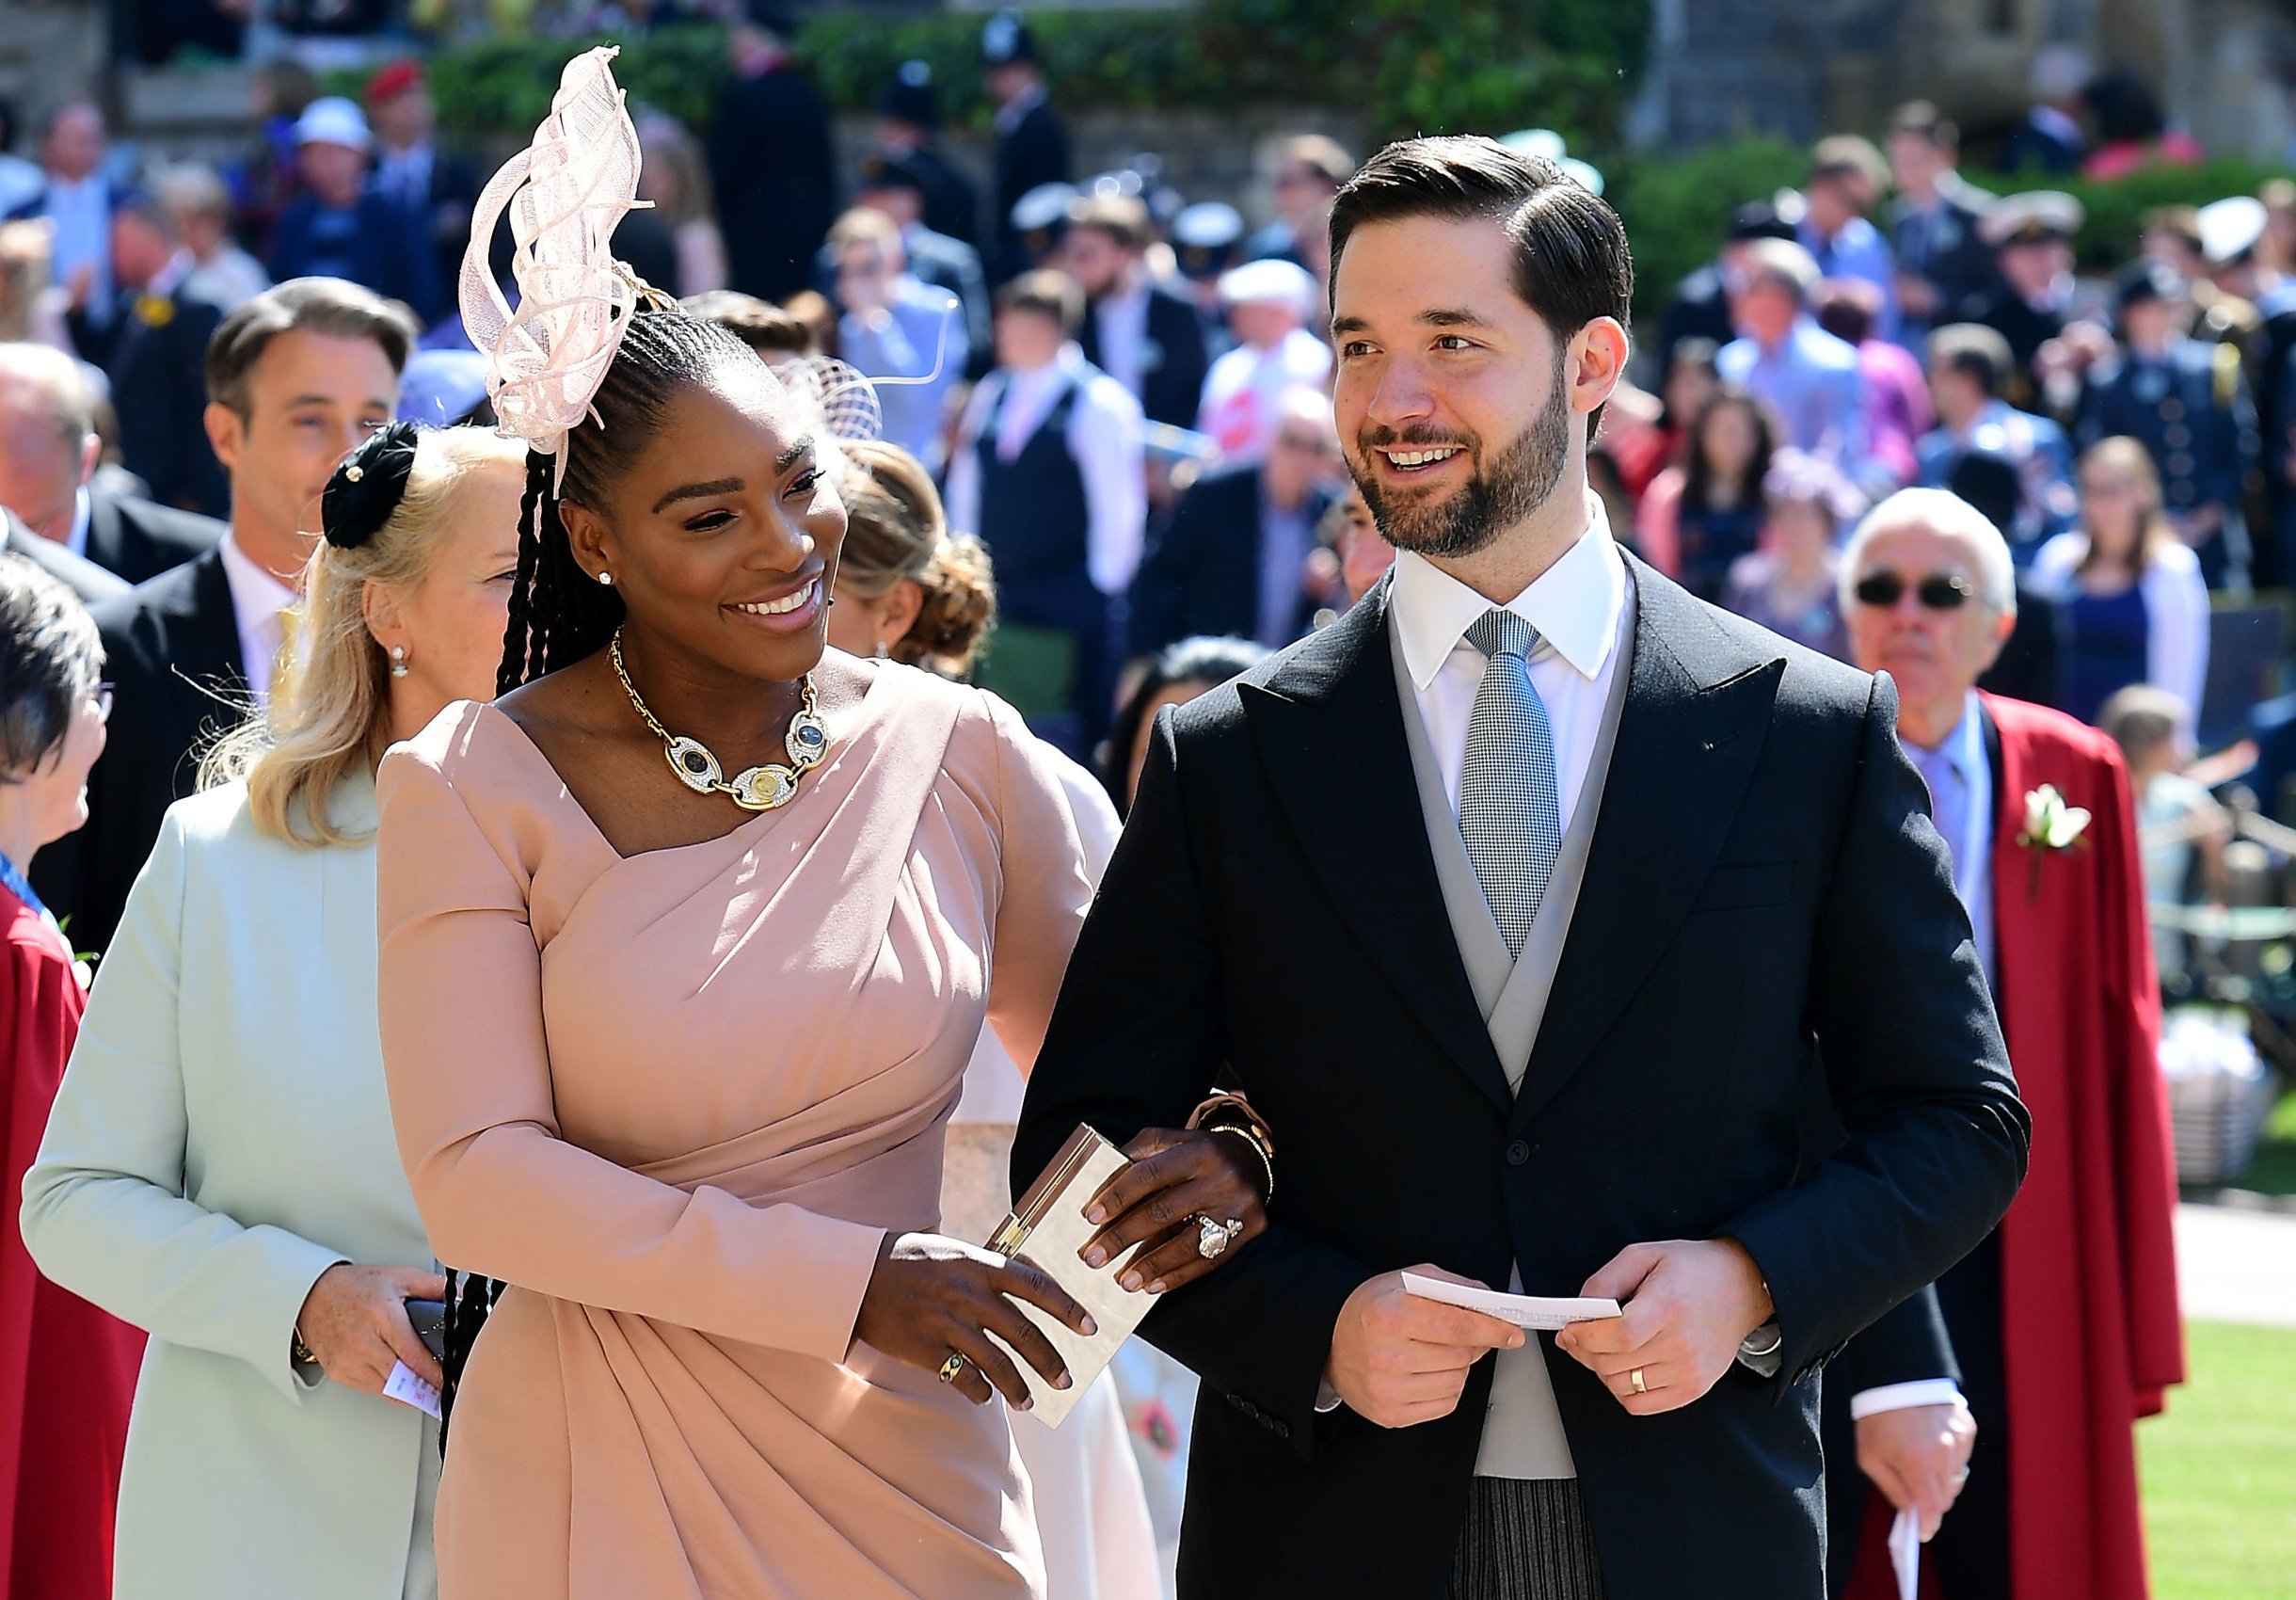 Serena Williams and Alexis Ohanian at Prince Harry and Meghan Markle's wedding ceremony at St George's Chapel, Windsor Castle, in Windsor, on May 19, 2018. | Source: Getty Images